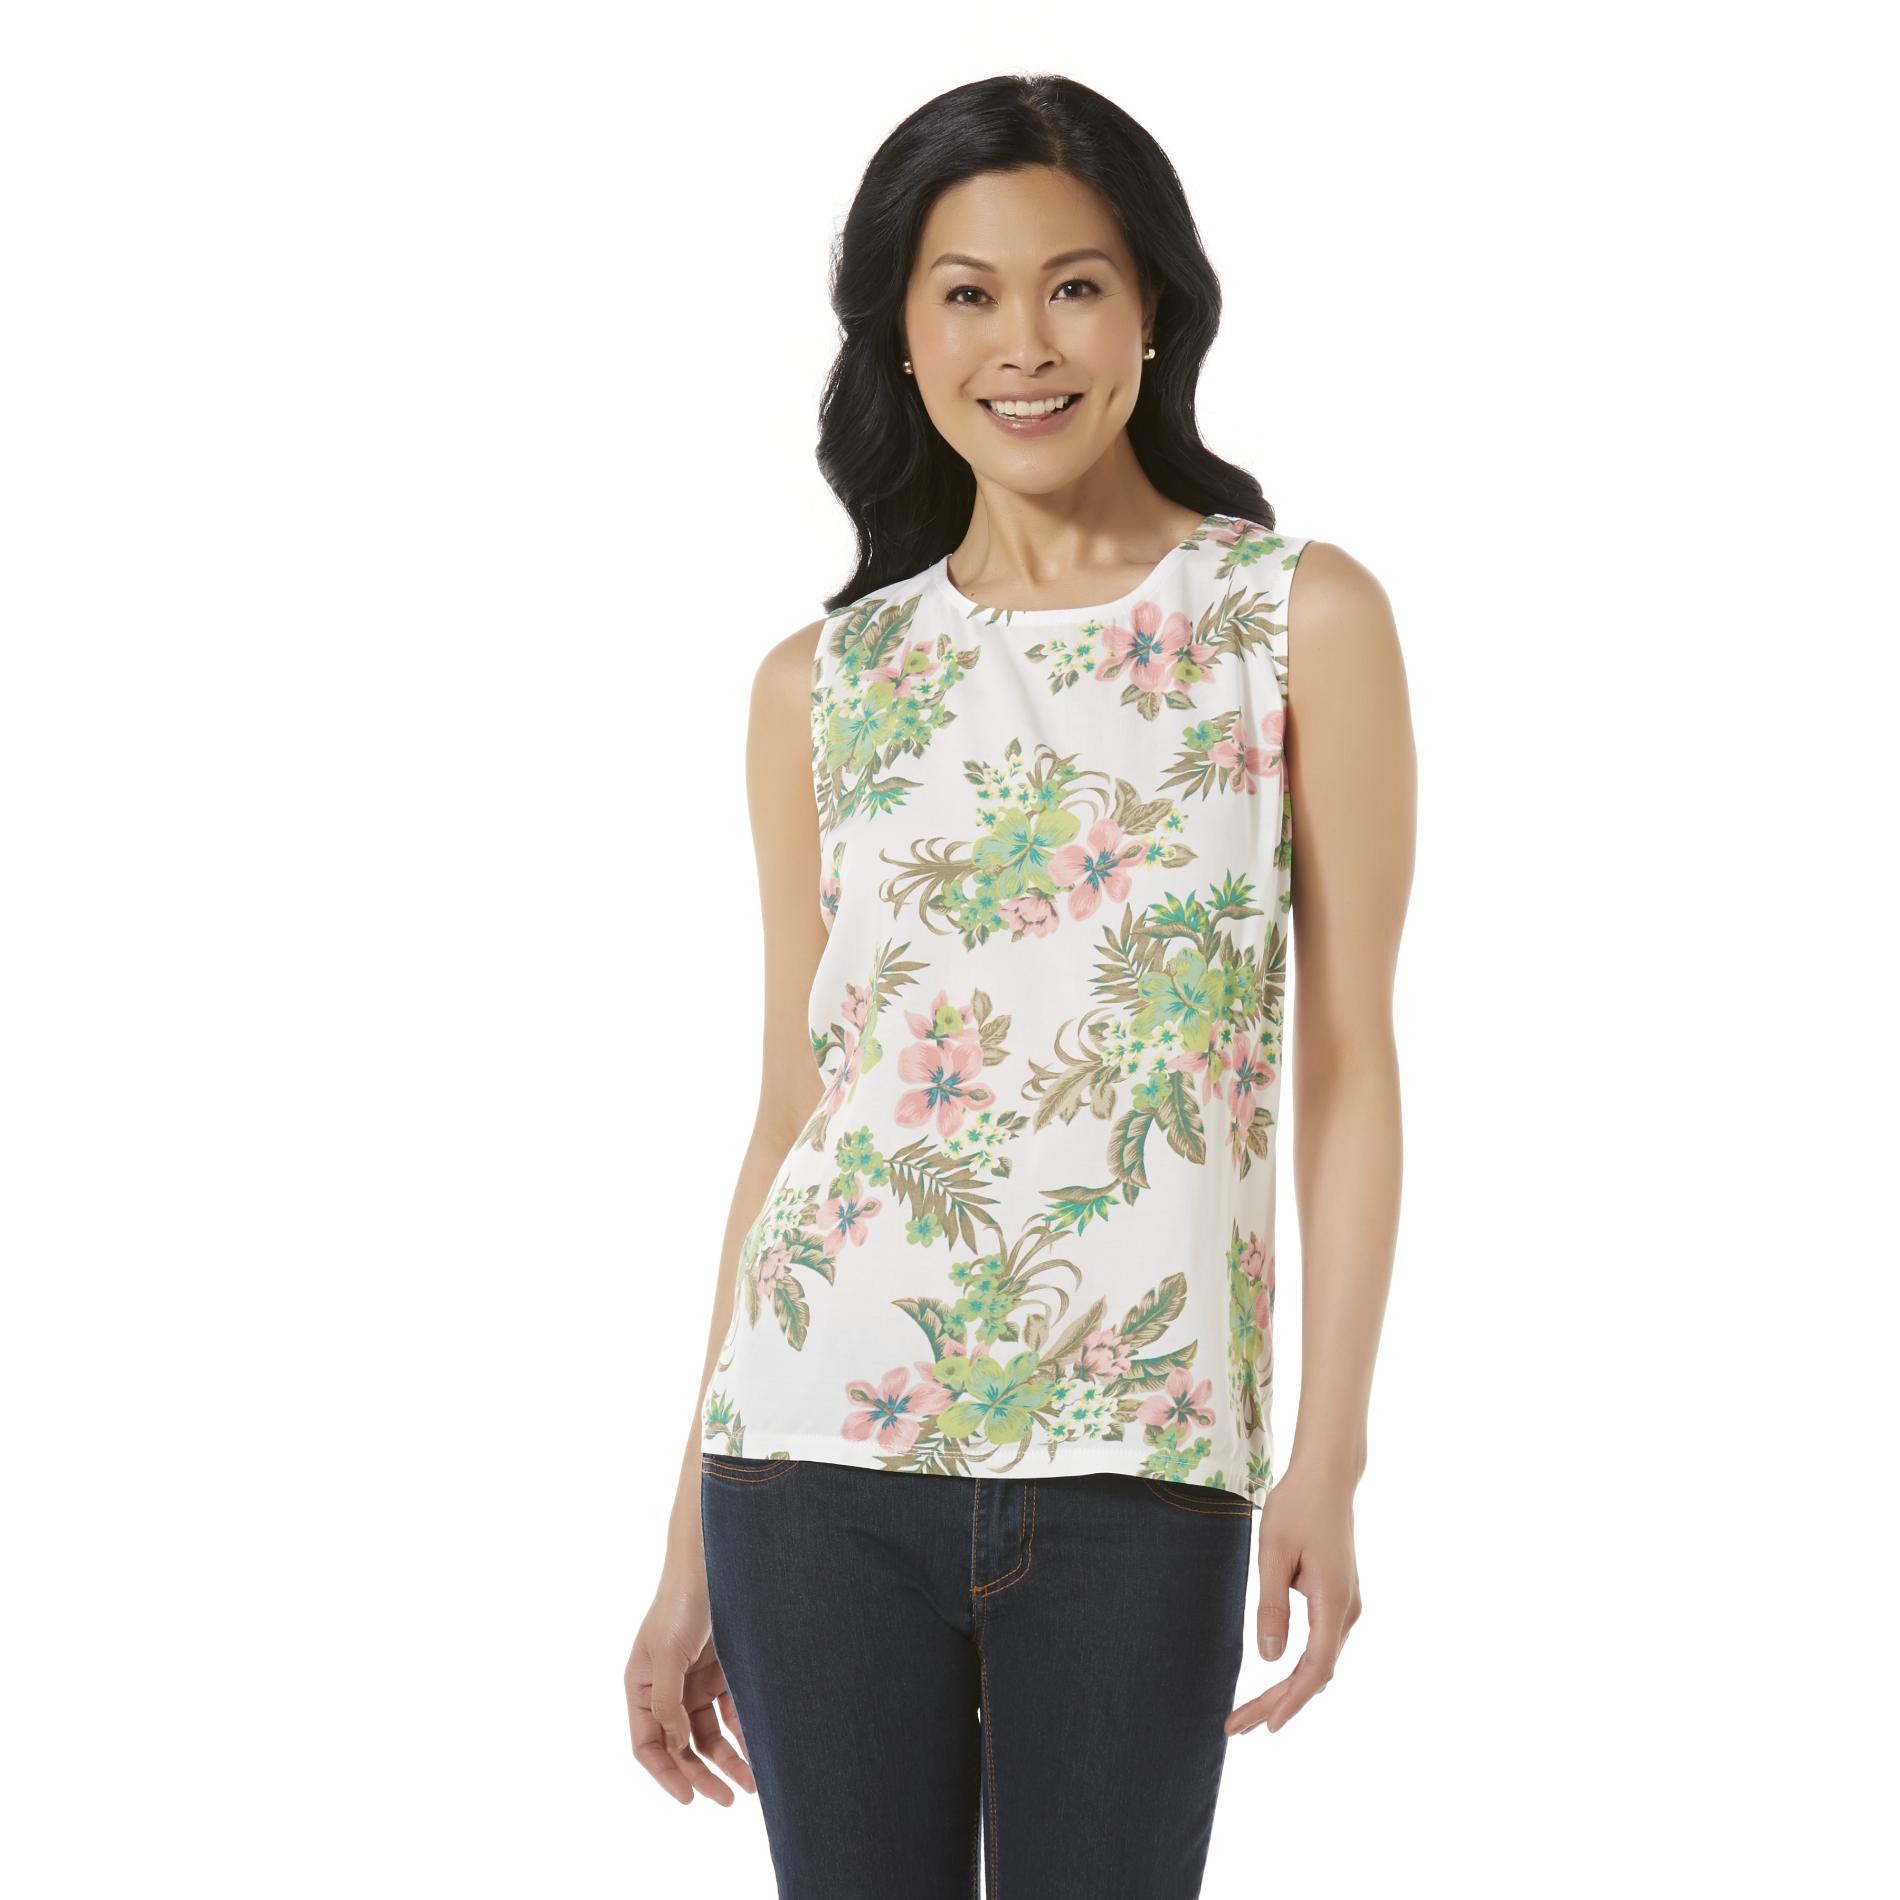 Basic Editions Women's Sleeveless High-Low Top - Floral Print